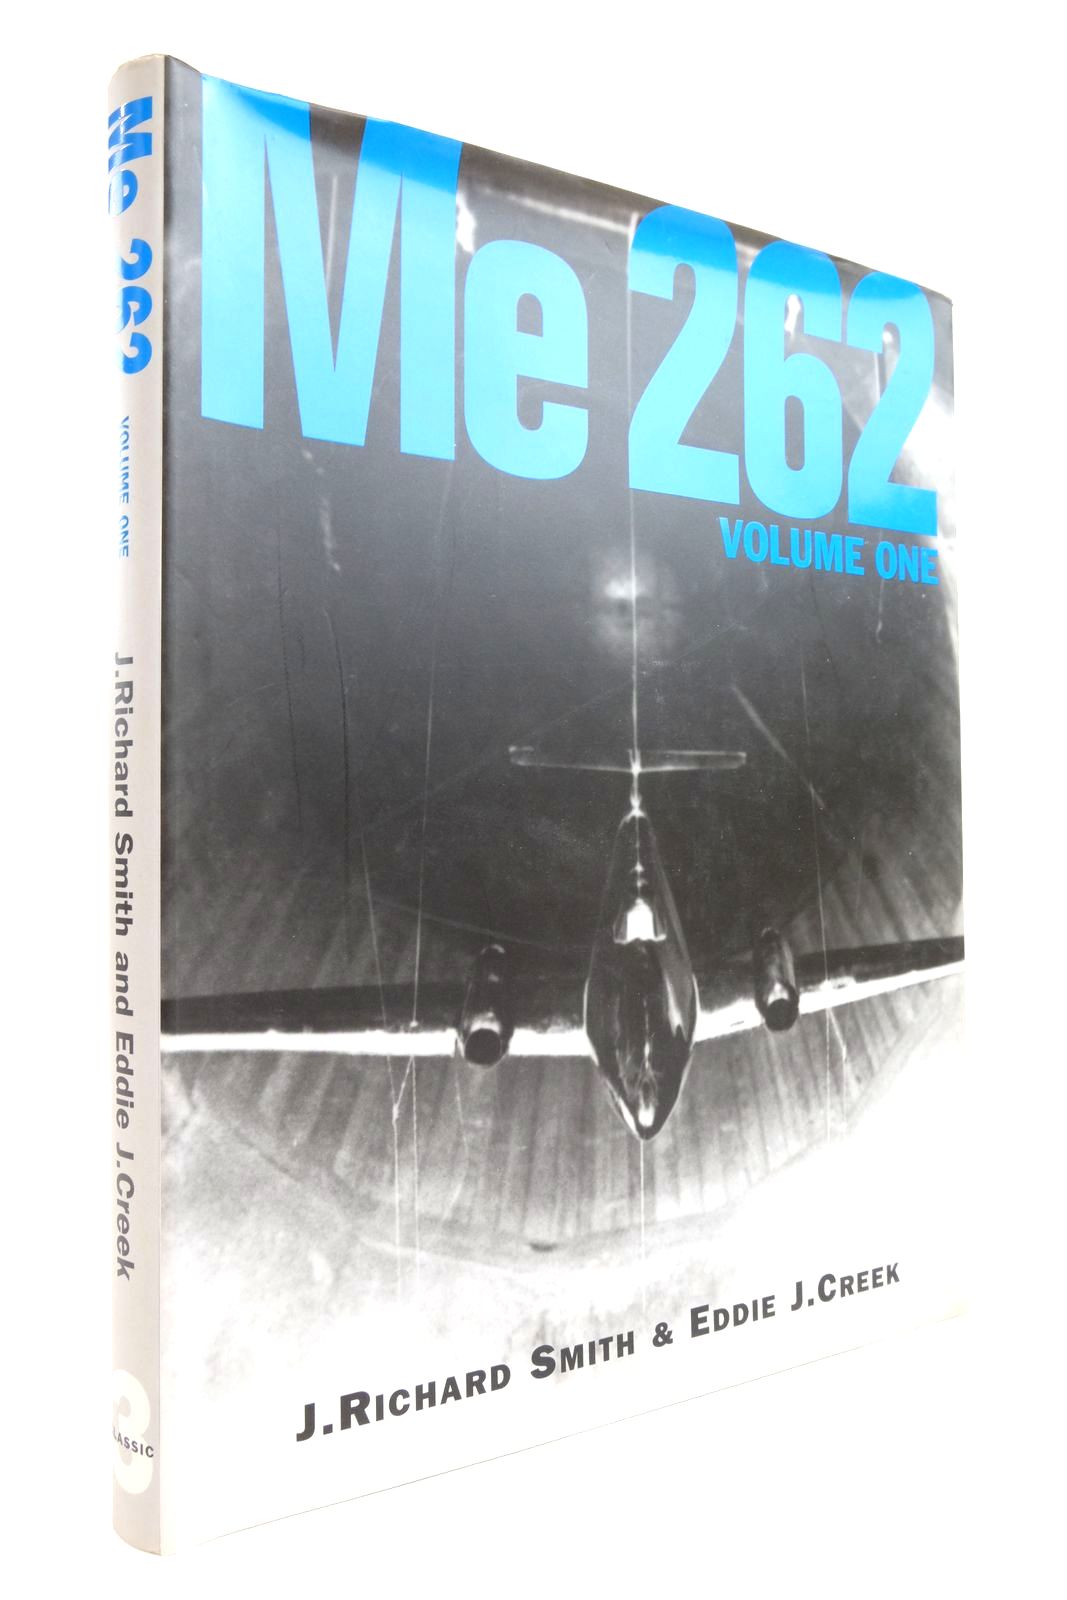 Photo of ME 262 VOLUME ONE written by Smith, J. Richard Creek, E.J. et al, published by Classic Publications (STOCK CODE: 2137318)  for sale by Stella & Rose's Books